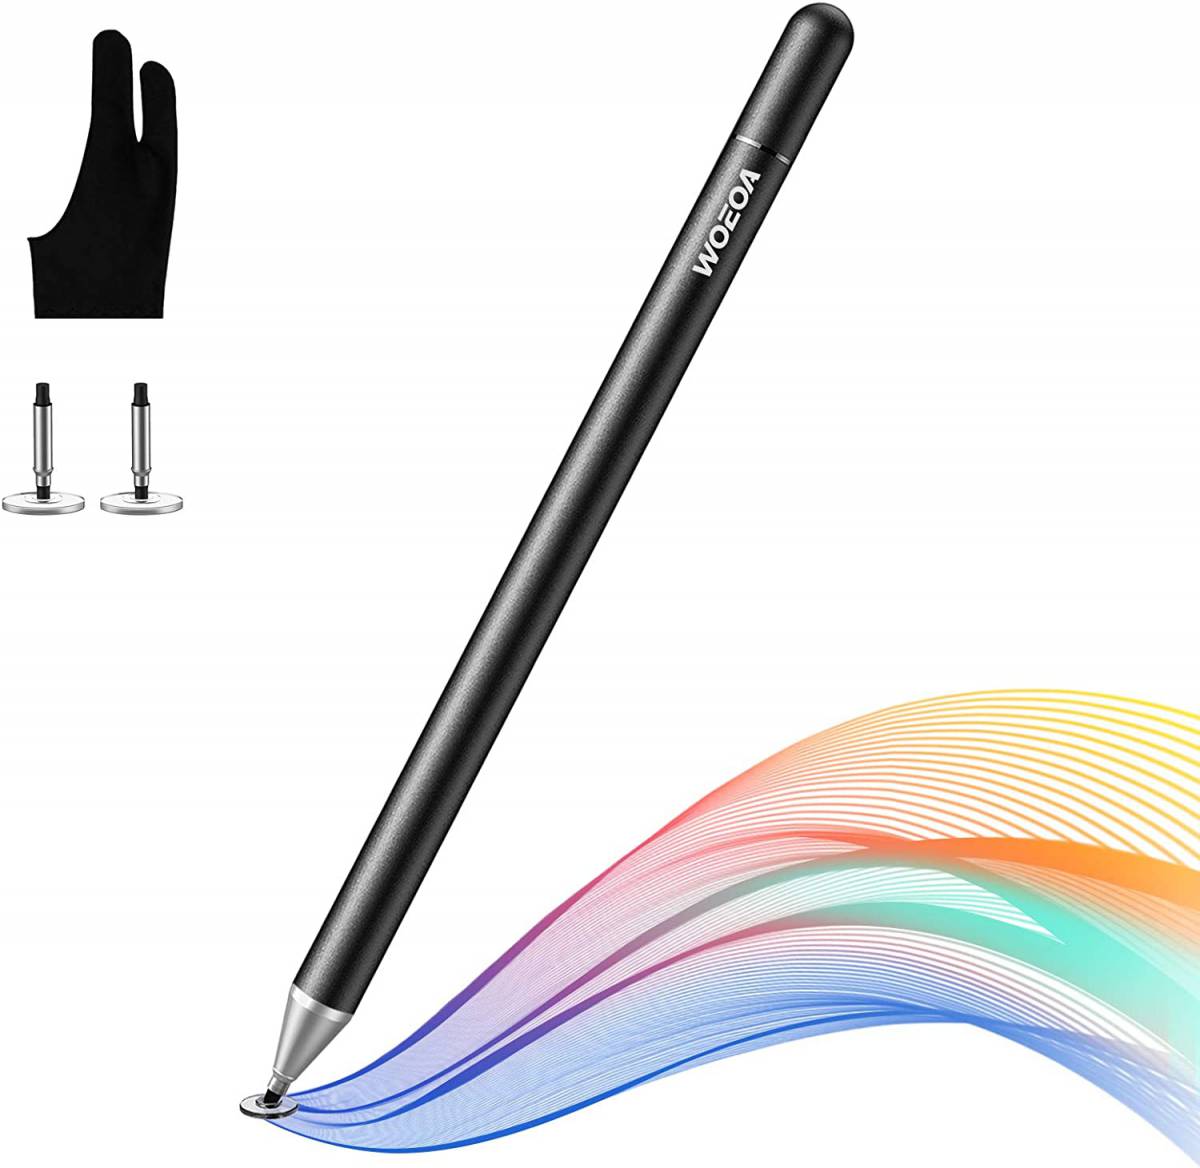 Colorful glamor coloring stylus